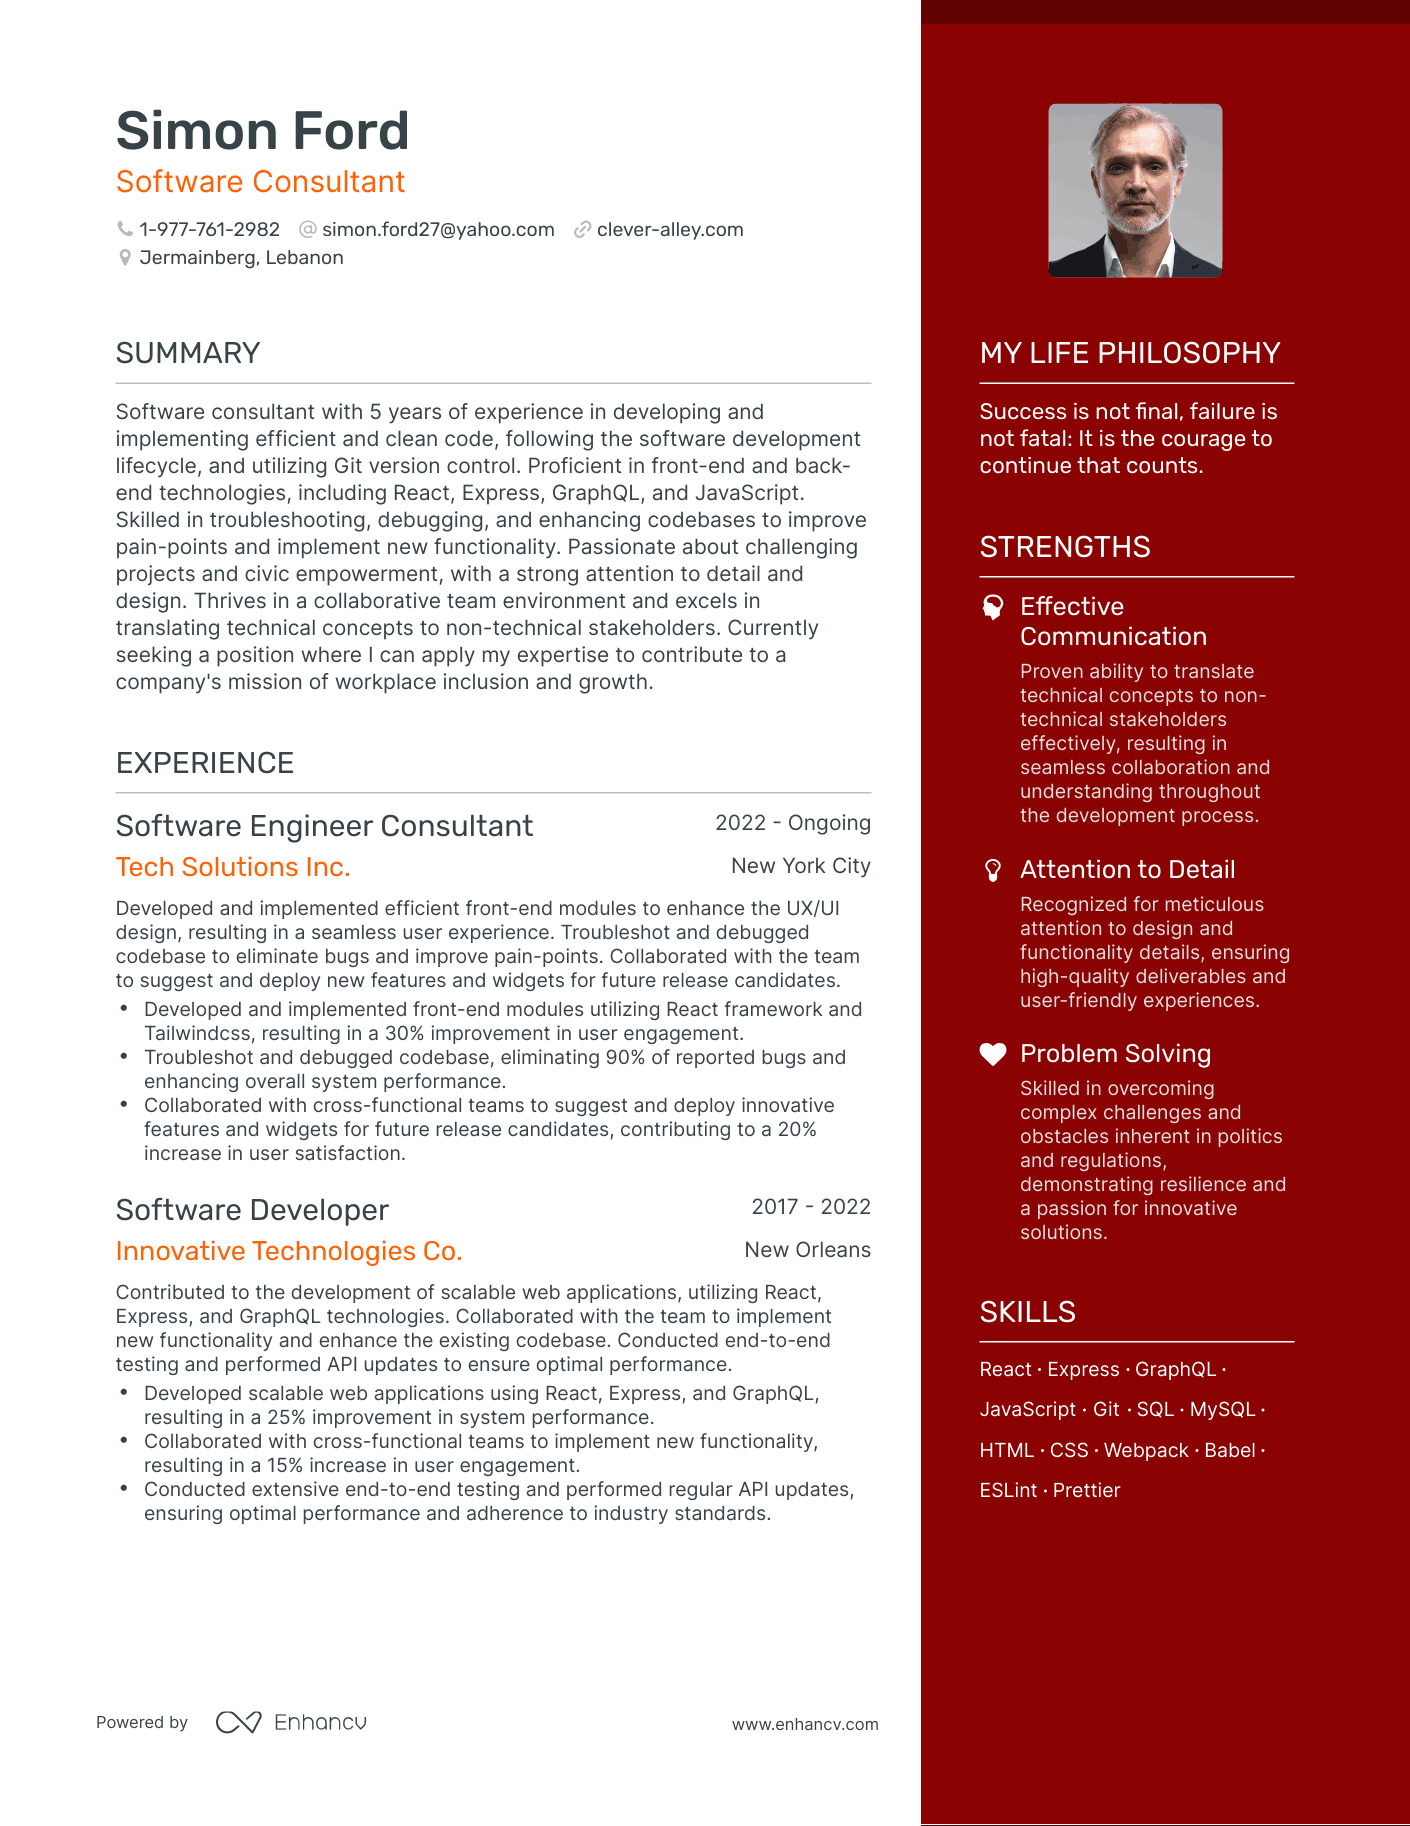 Software Consultant resume example